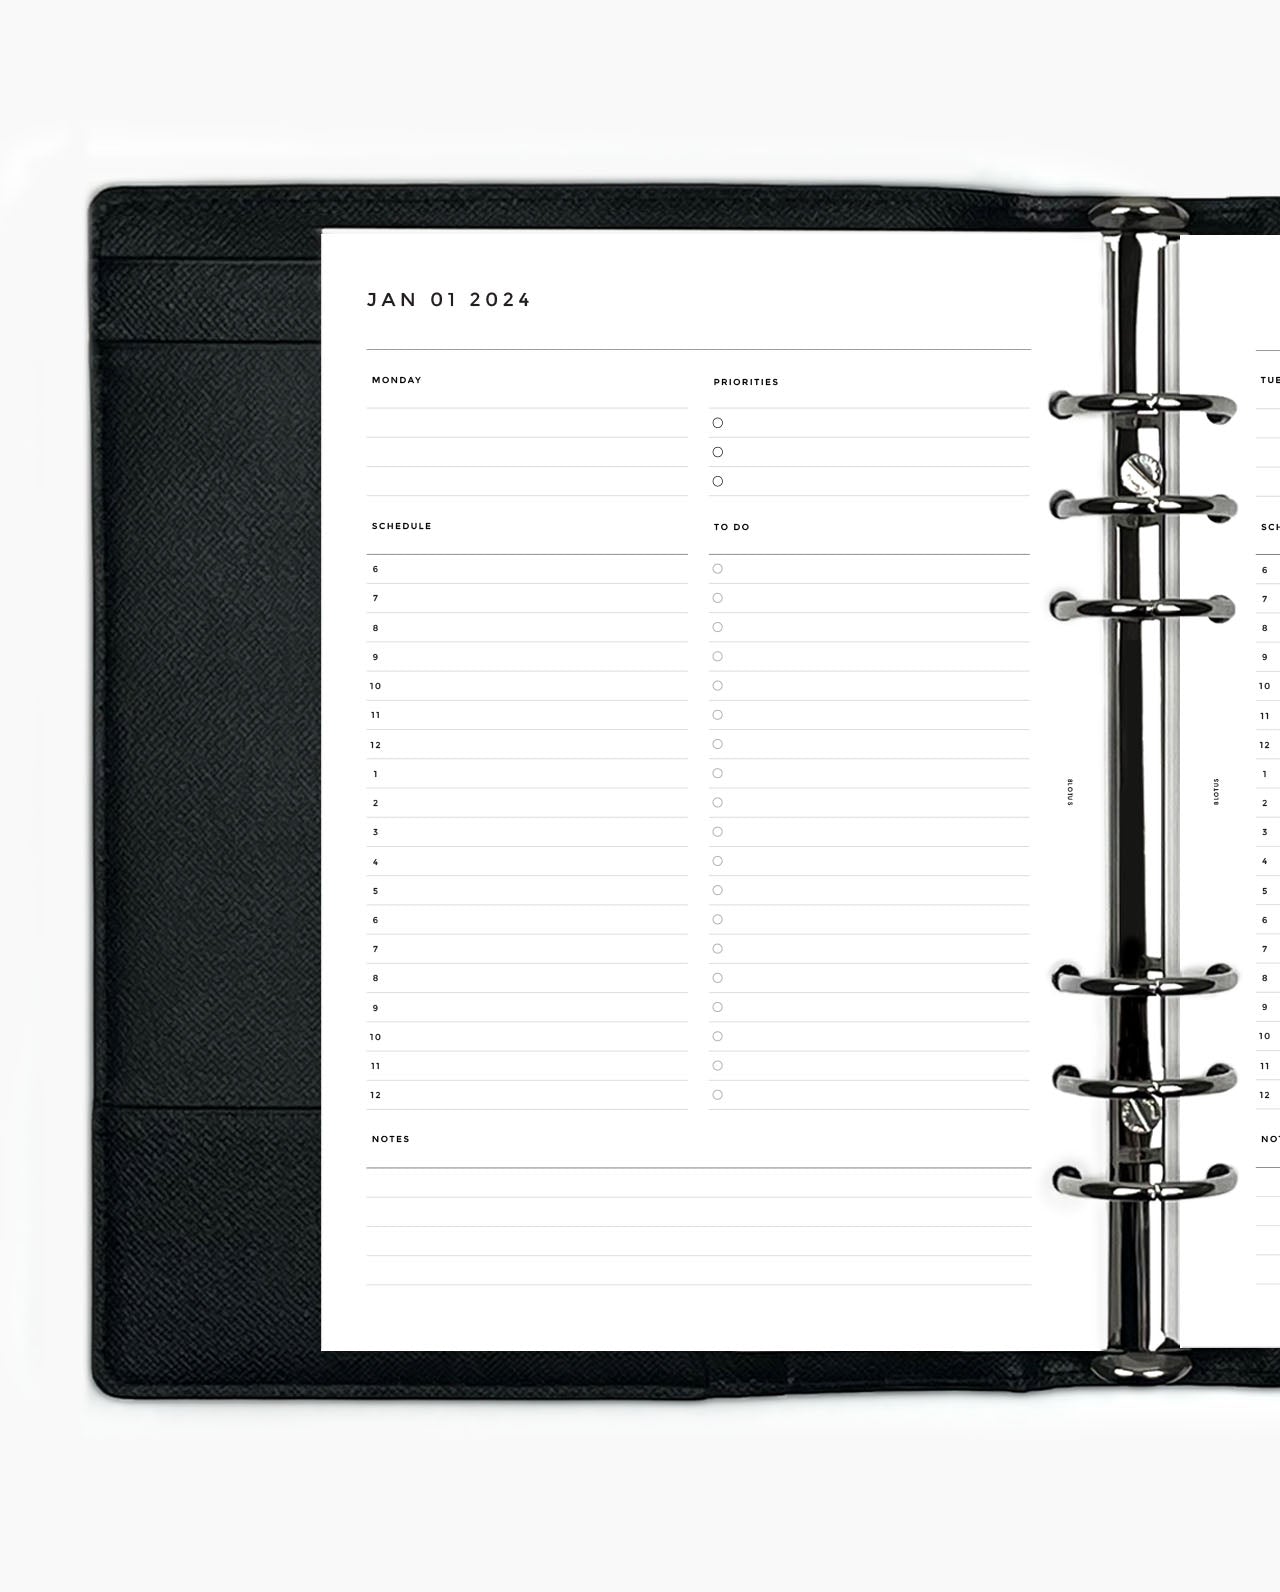 MN203 - 2024 DAILY PLANNER - HOURLY - DO1P - Printable PDF